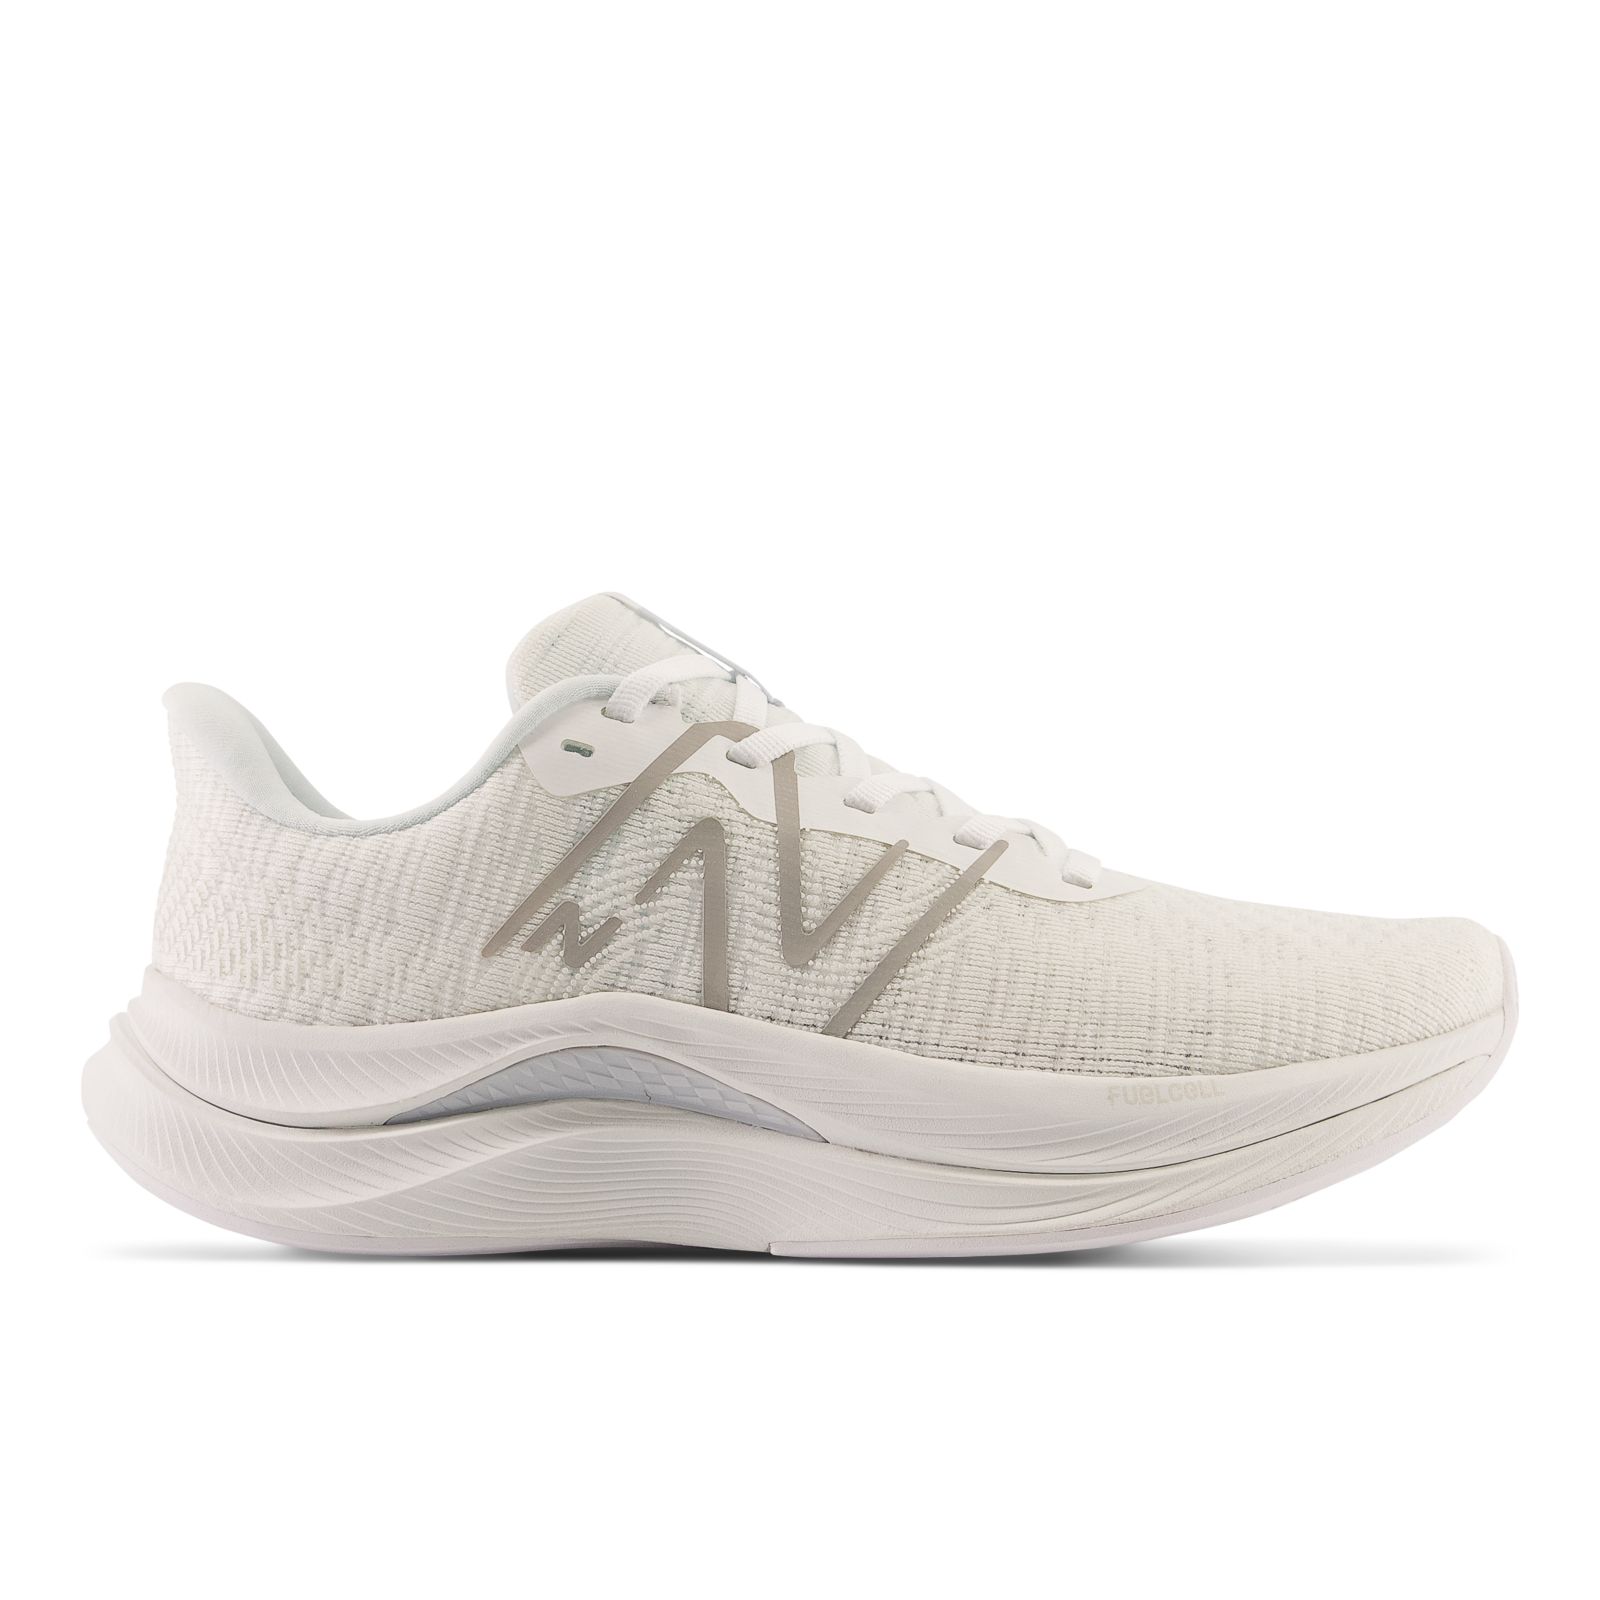 Women's FuelCell Propel v4 Shoes - New Balance